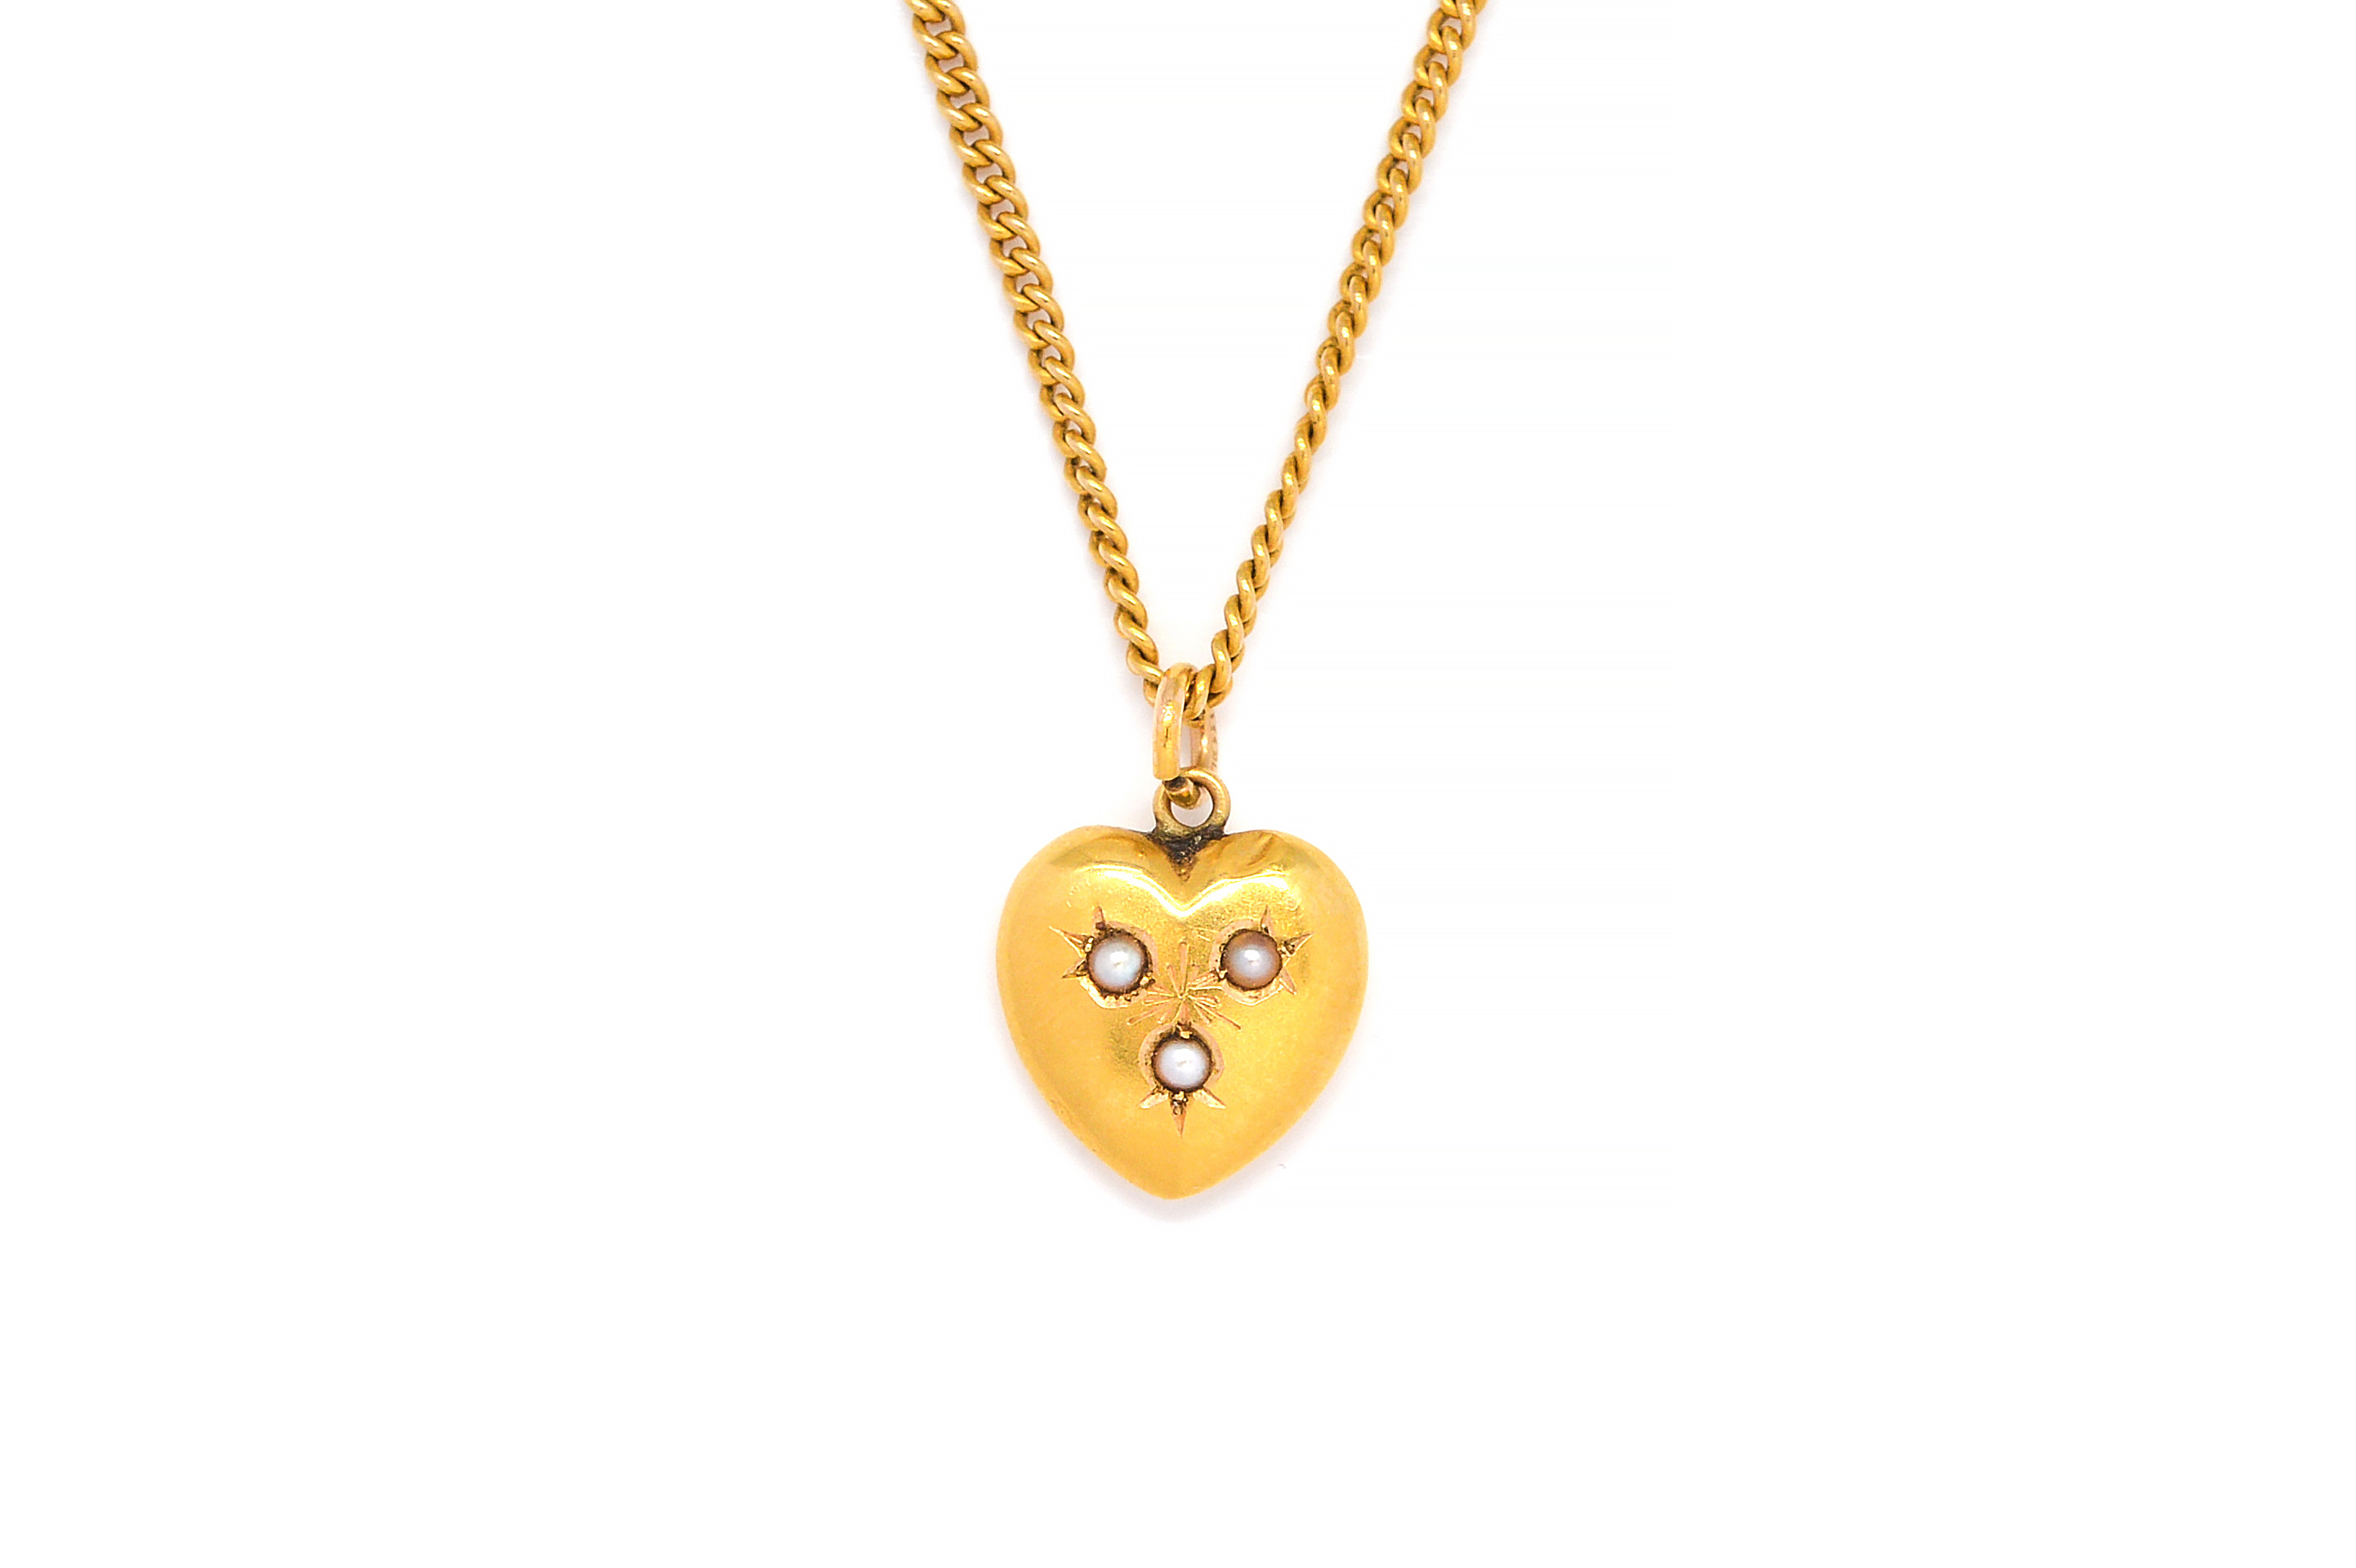 A GOLD AND SEED PEARL HEART SHAPED